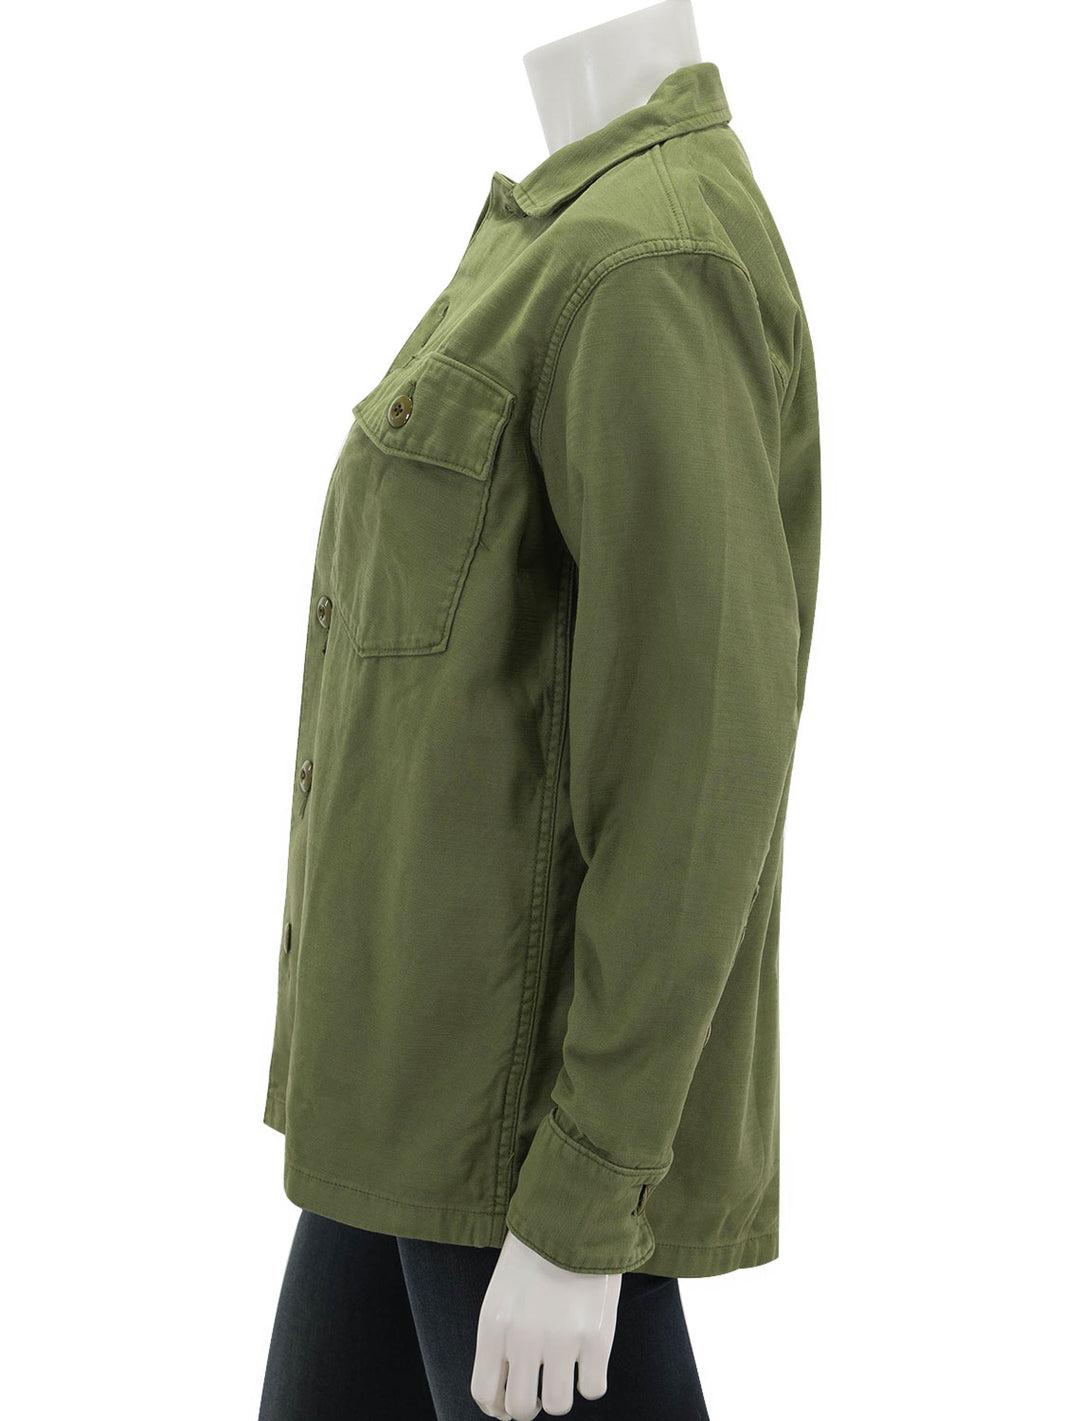 Side view of Faherty's savannah cotton overshirt in fatigue.